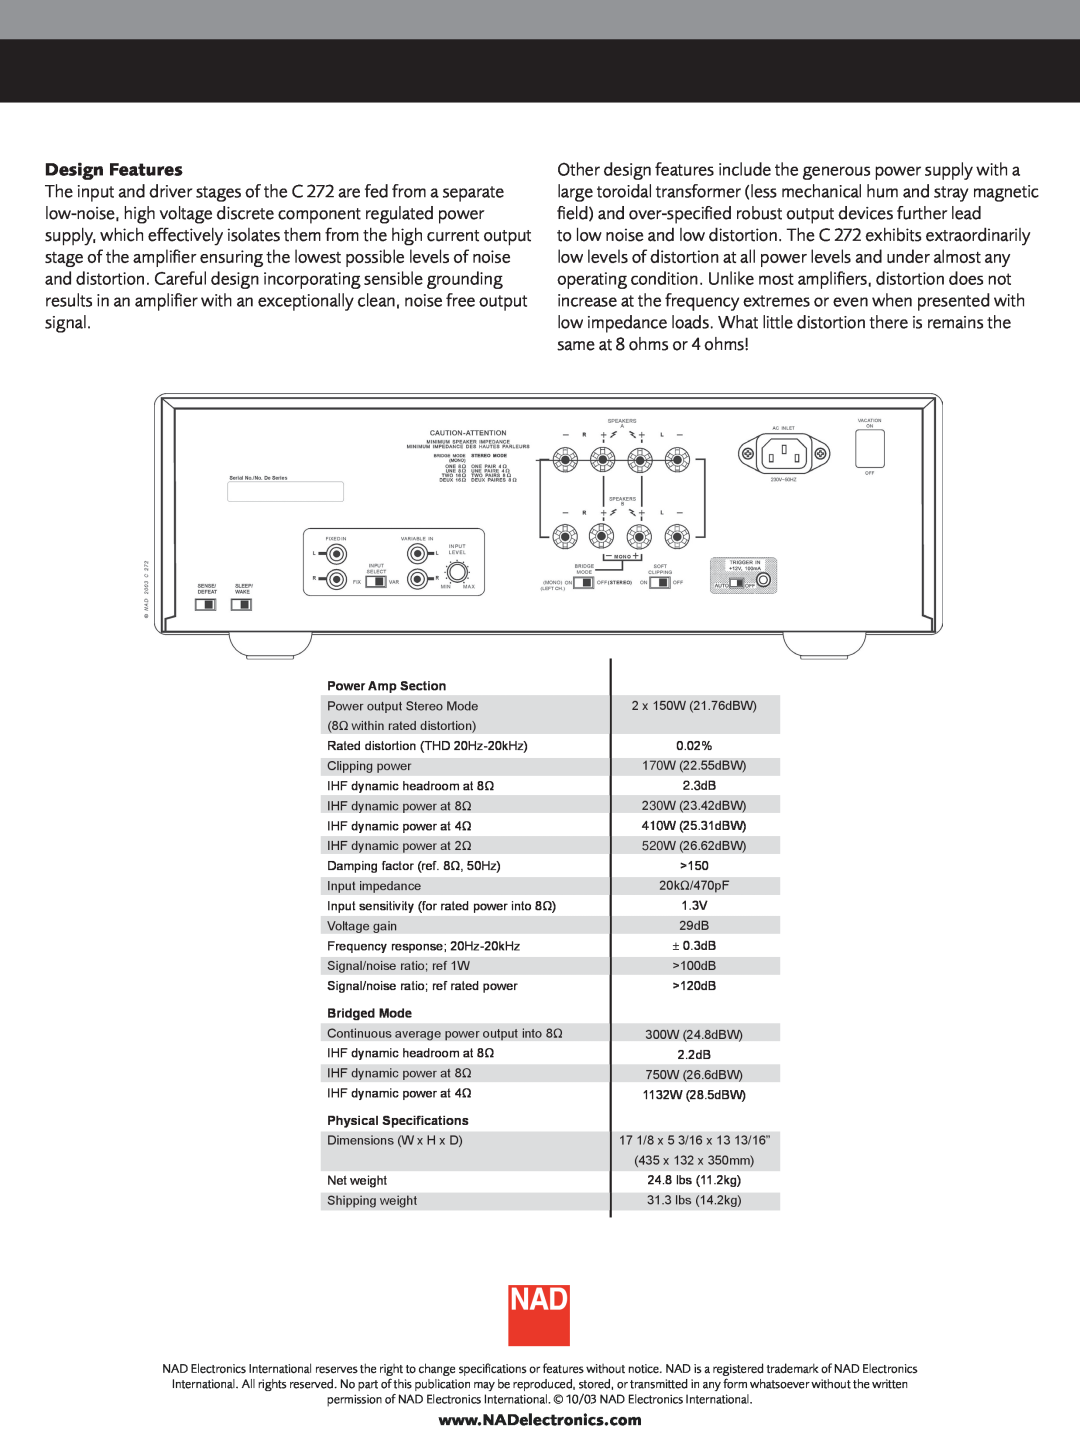 NAD C272 brochure Design Features, Power Amp Section, Bridged Mode, Physical Specifications 